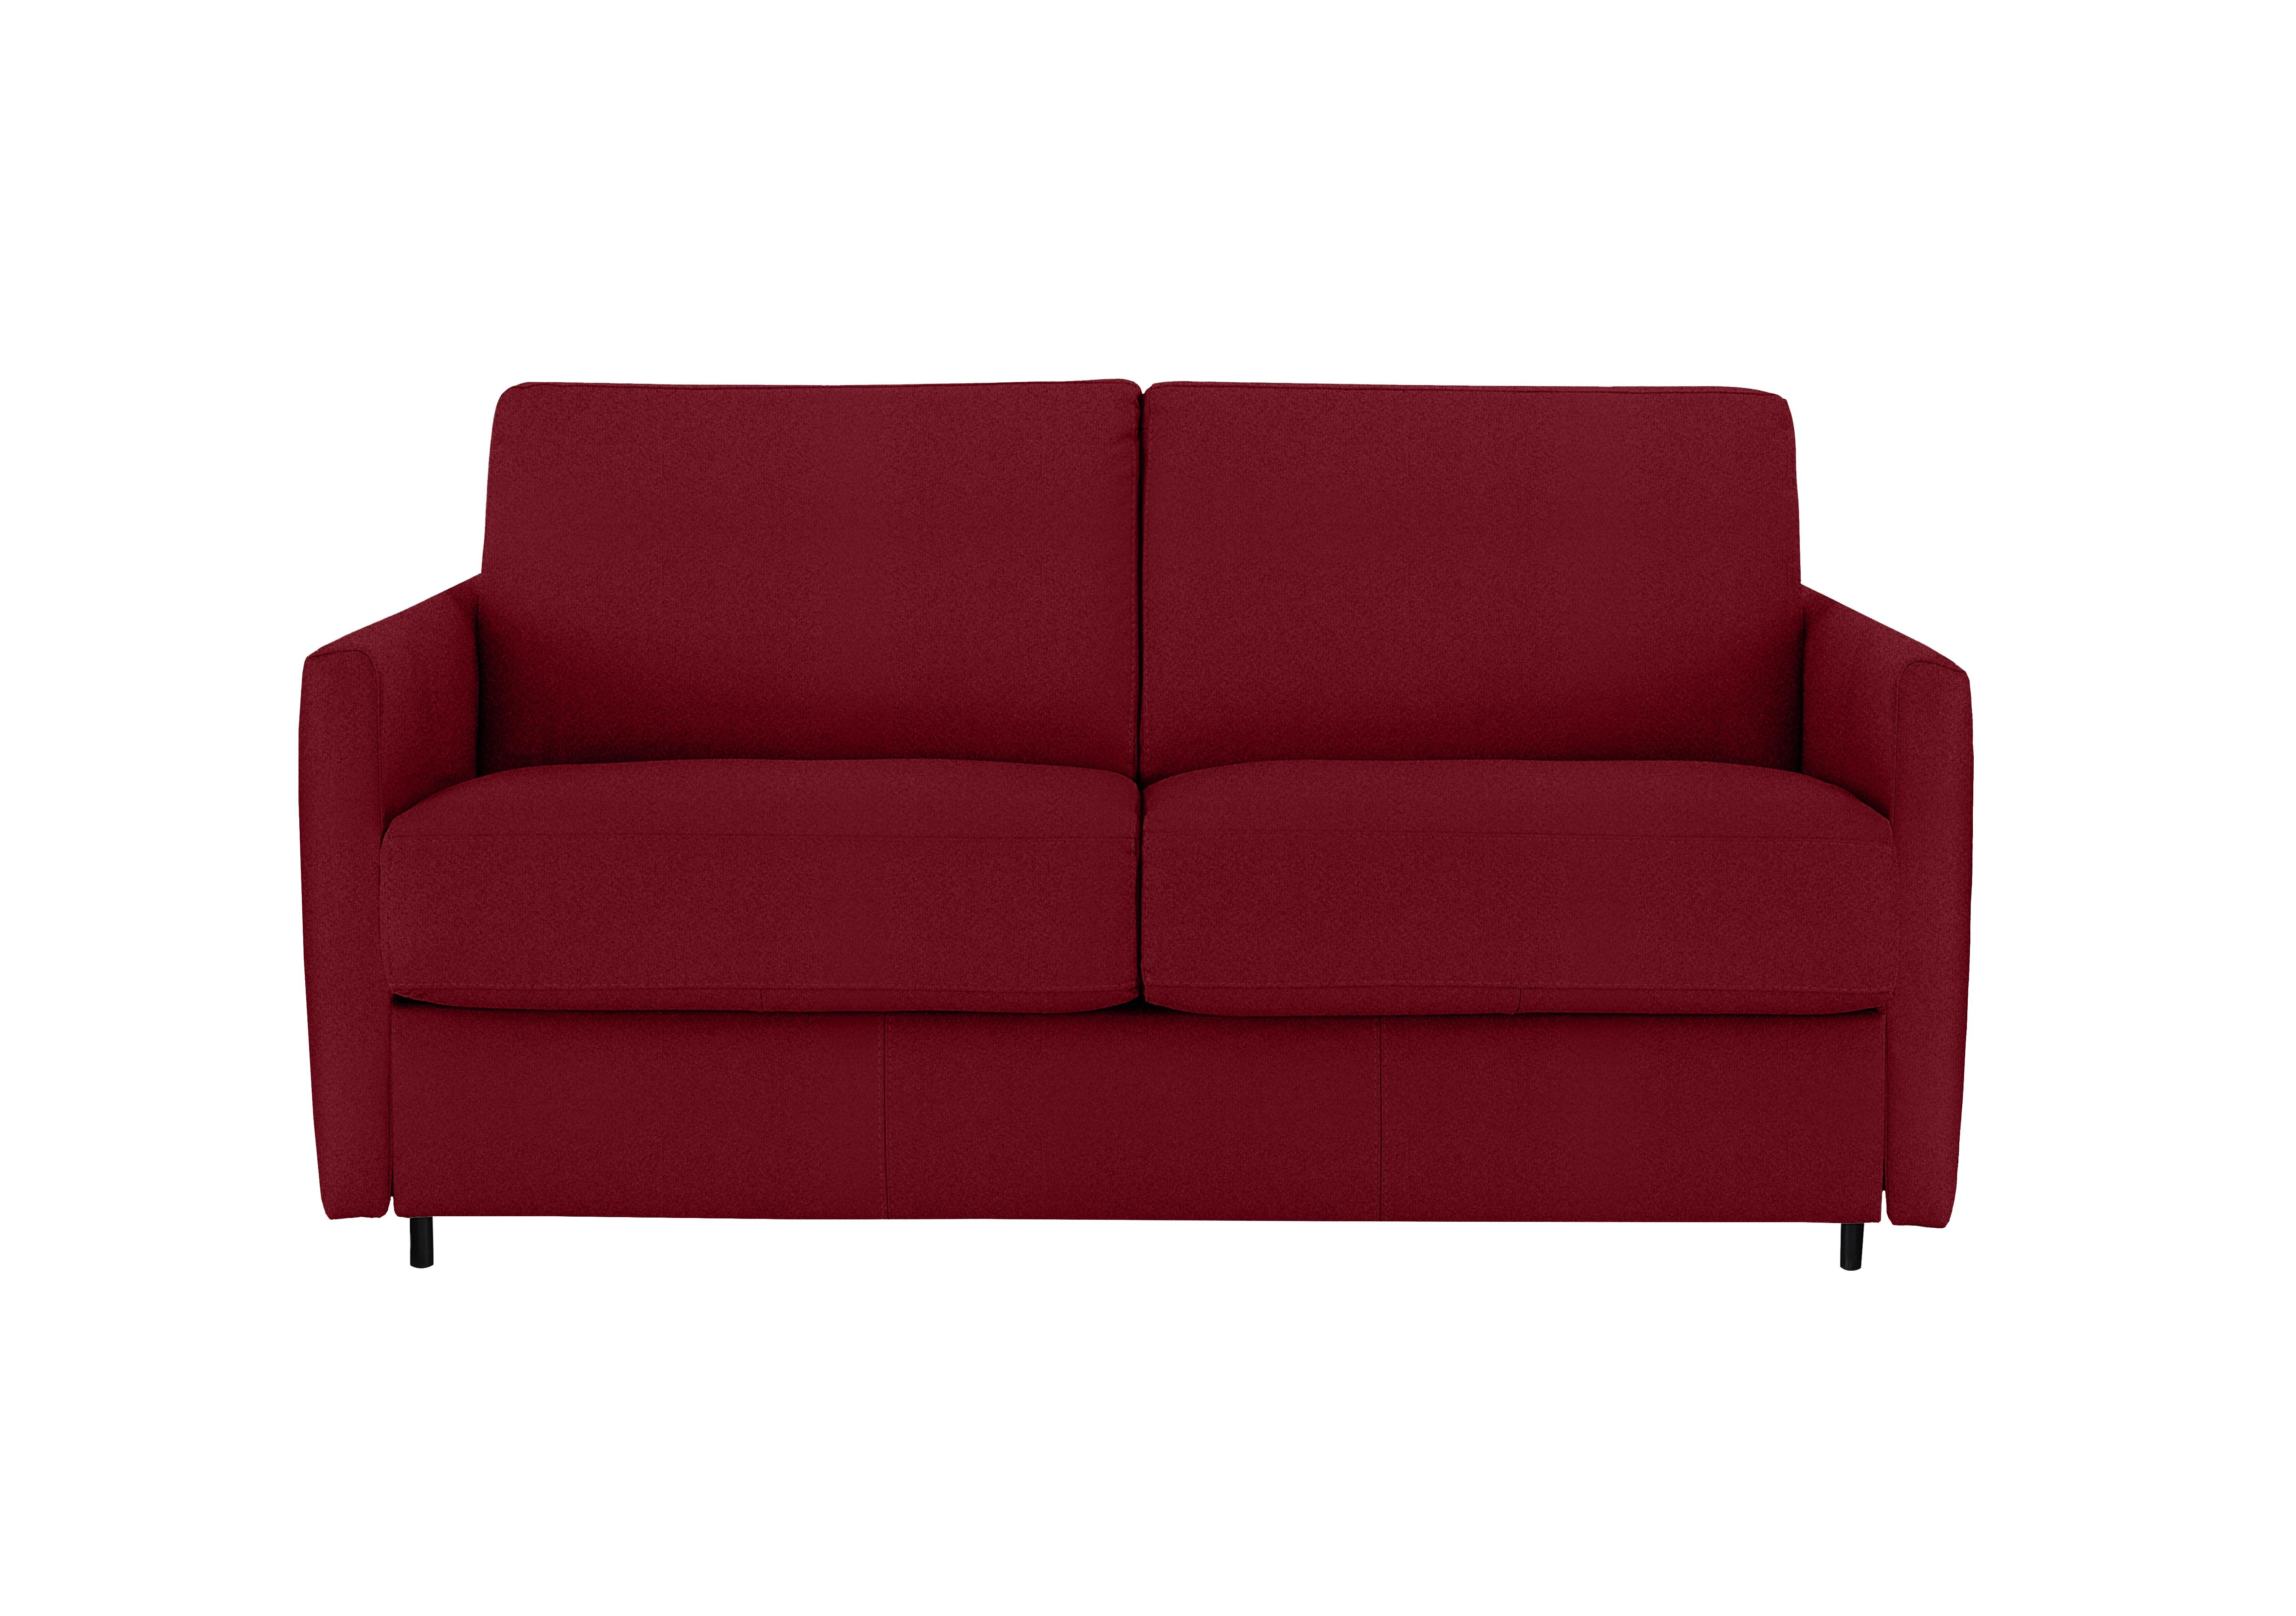 Alcova 2 Seater Fabric Sofa Bed with Slim Arms in Coupe Rosso 305 on Furniture Village